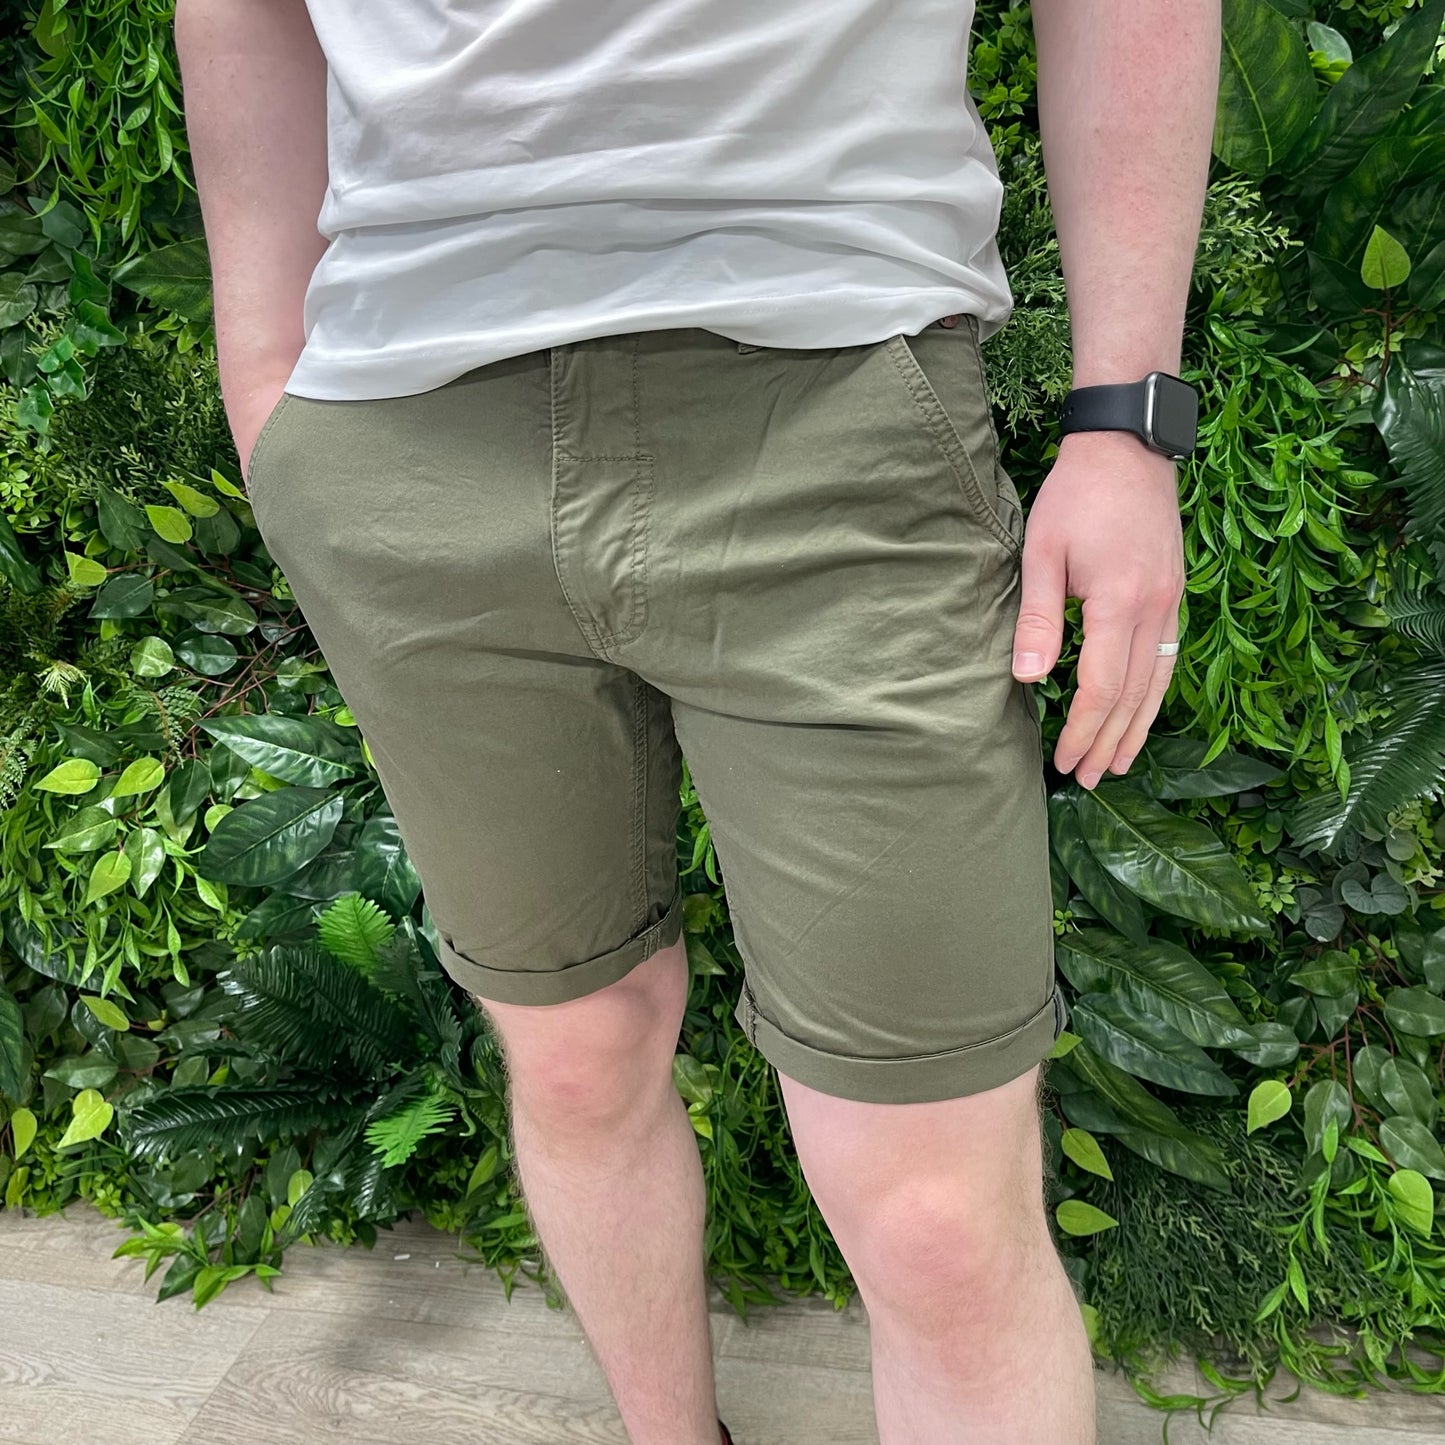 Chino Shorts in Khaki by Blend